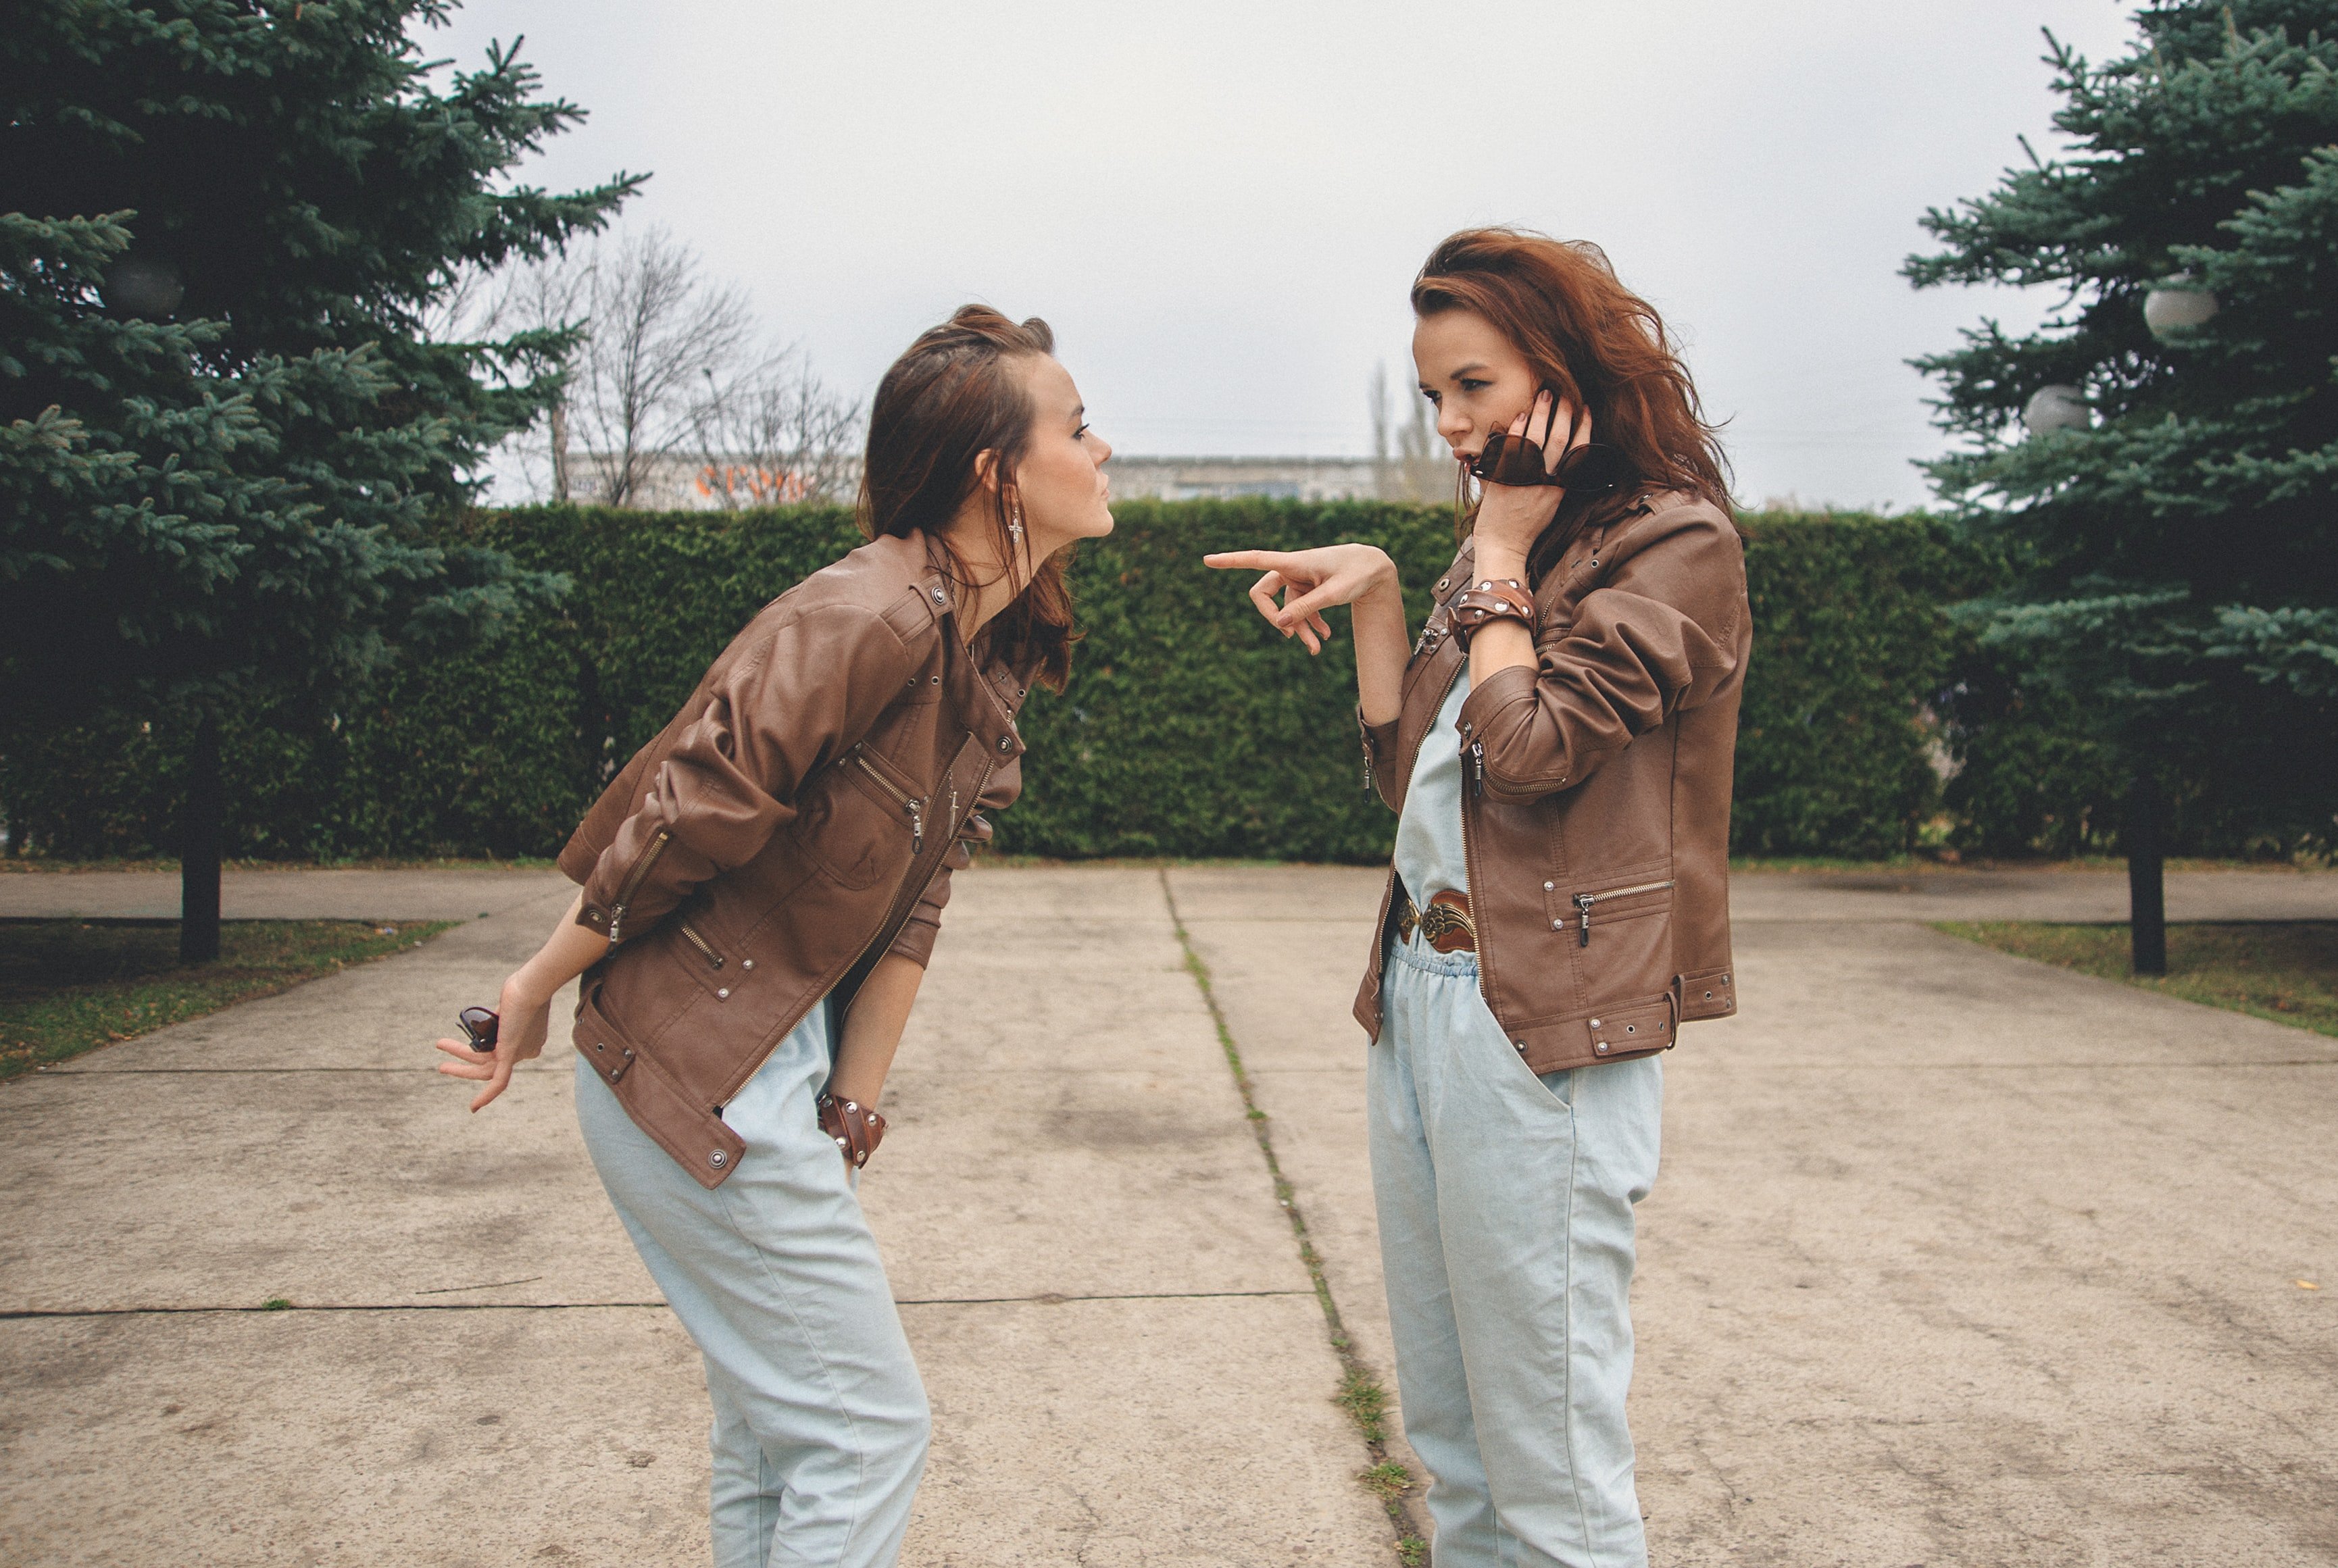 Jenna and Becky were stunned to discover they were identical. | Source: Pexels